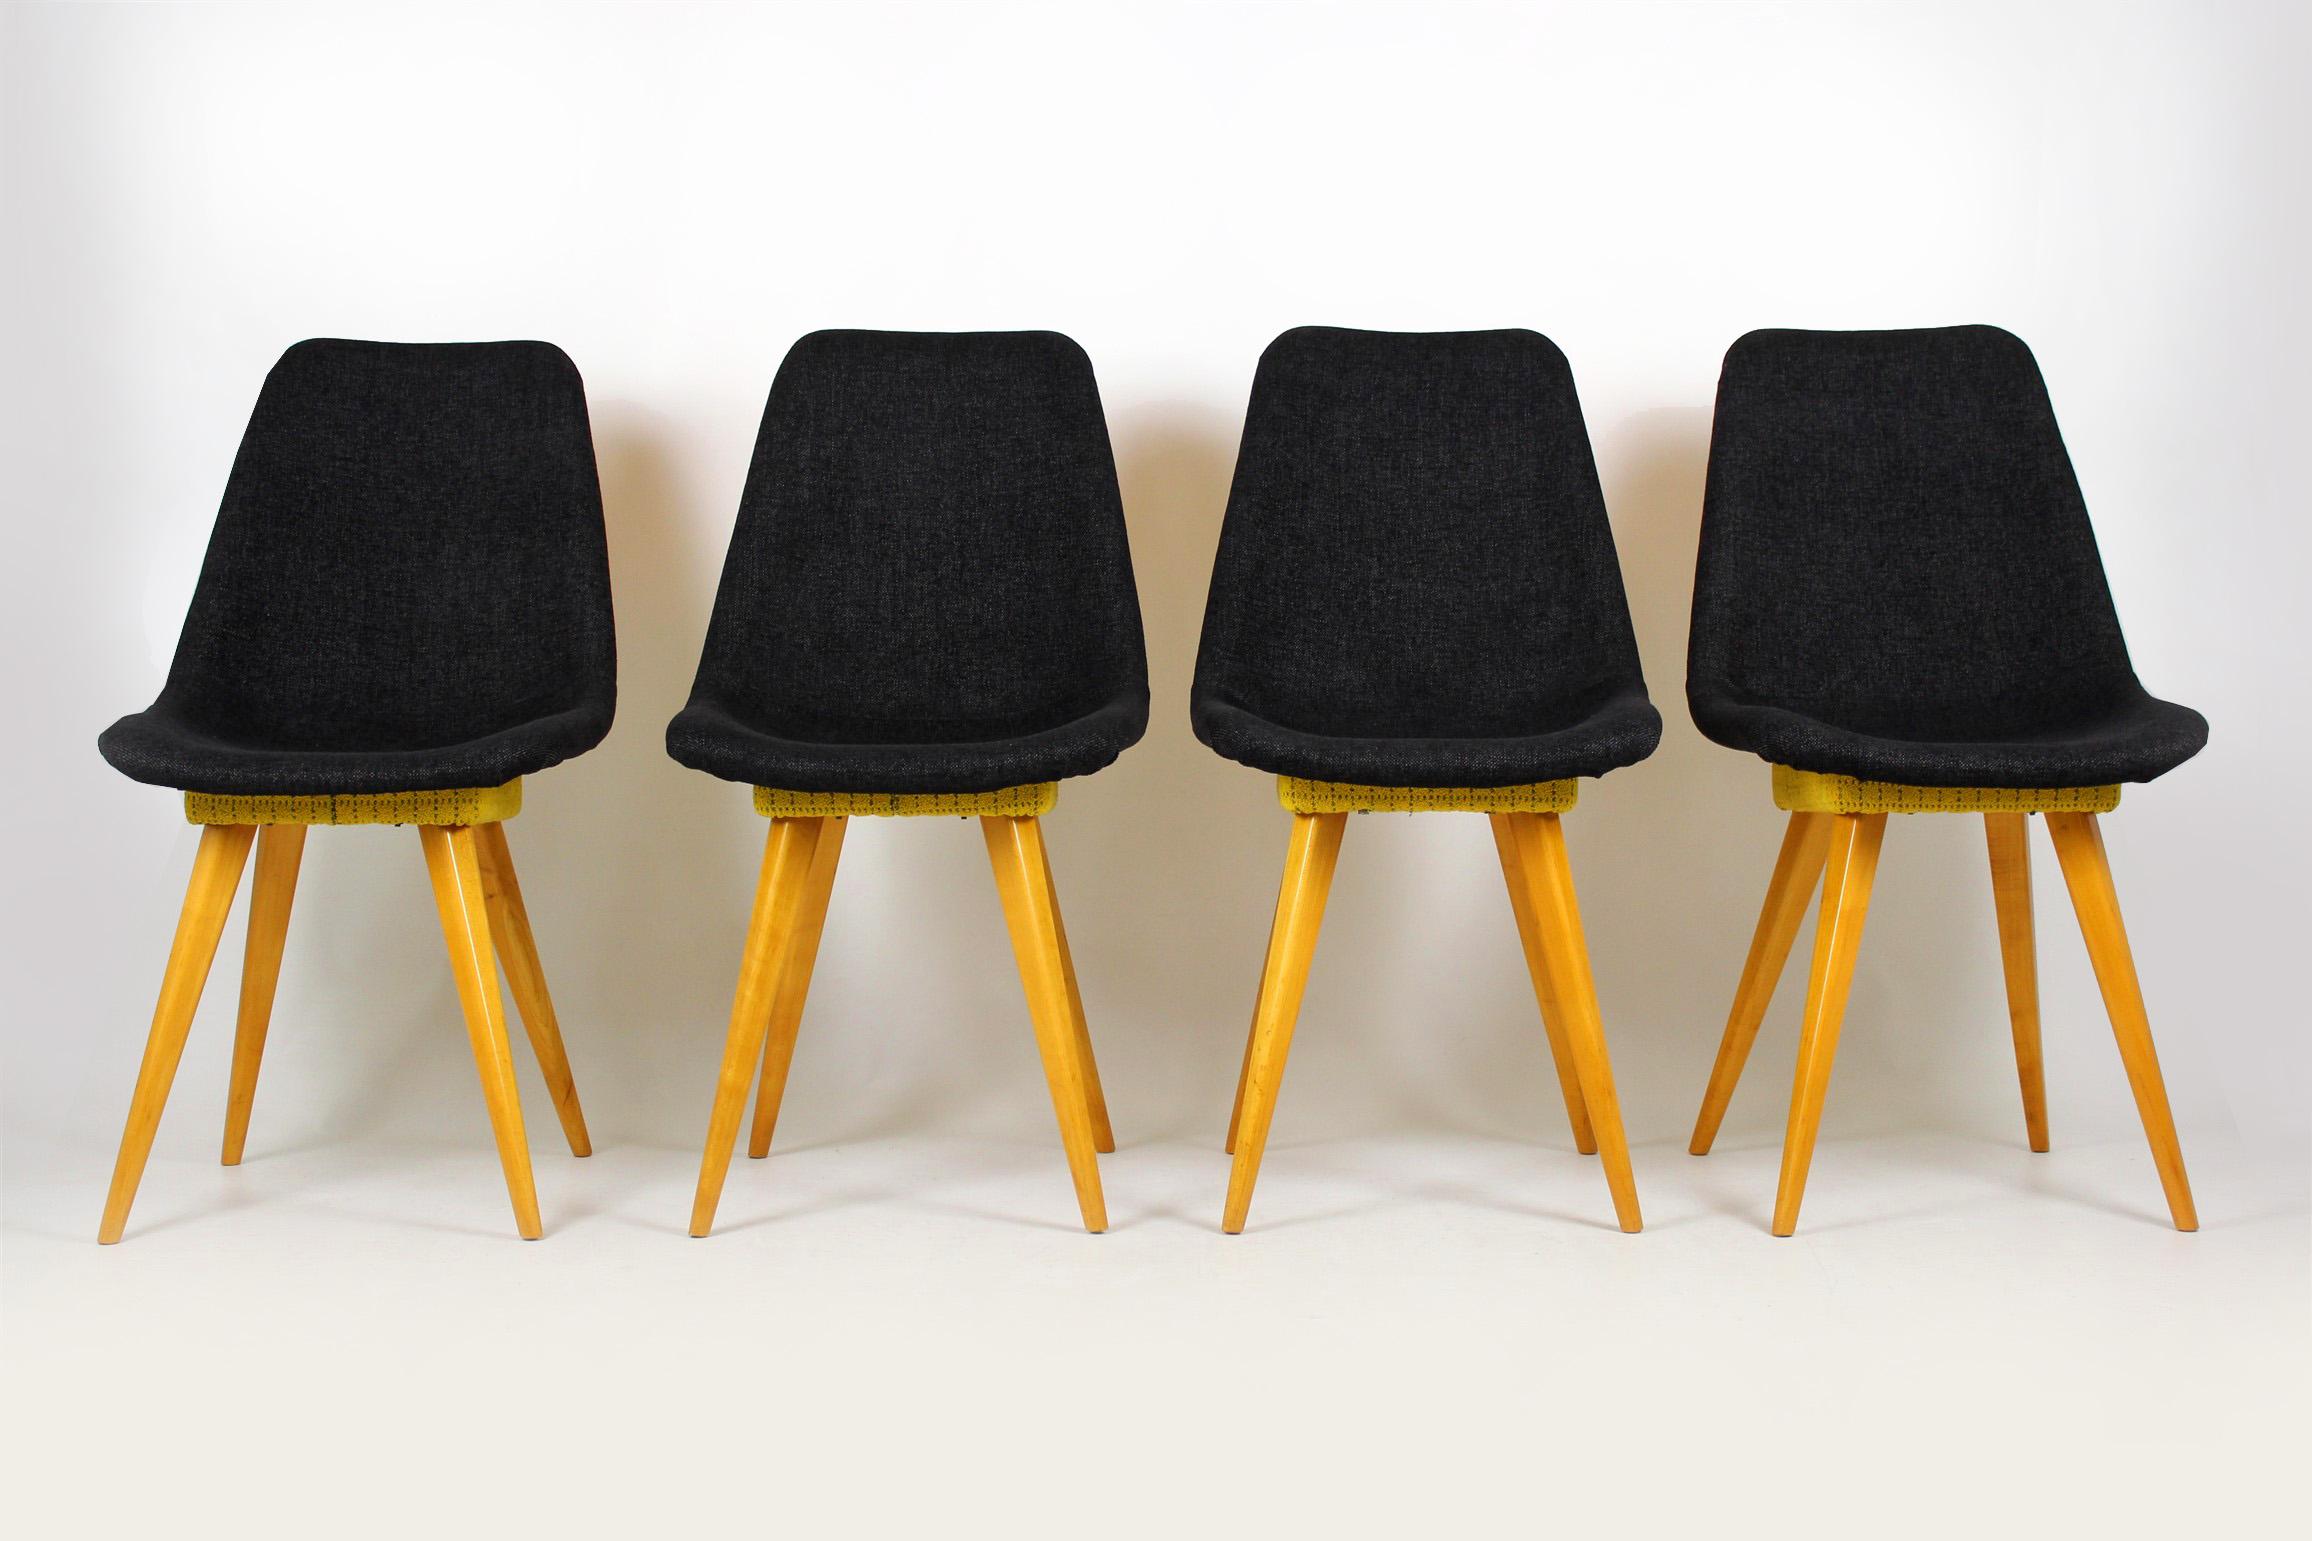 Set of four chairs from Drevovyroba Ostrava. Produced in 1960s in former Czechoslovakia. Seats upholstered with new dark grey fabric upholstery, yellow fabric is an original from the 1960s, preserved very well.